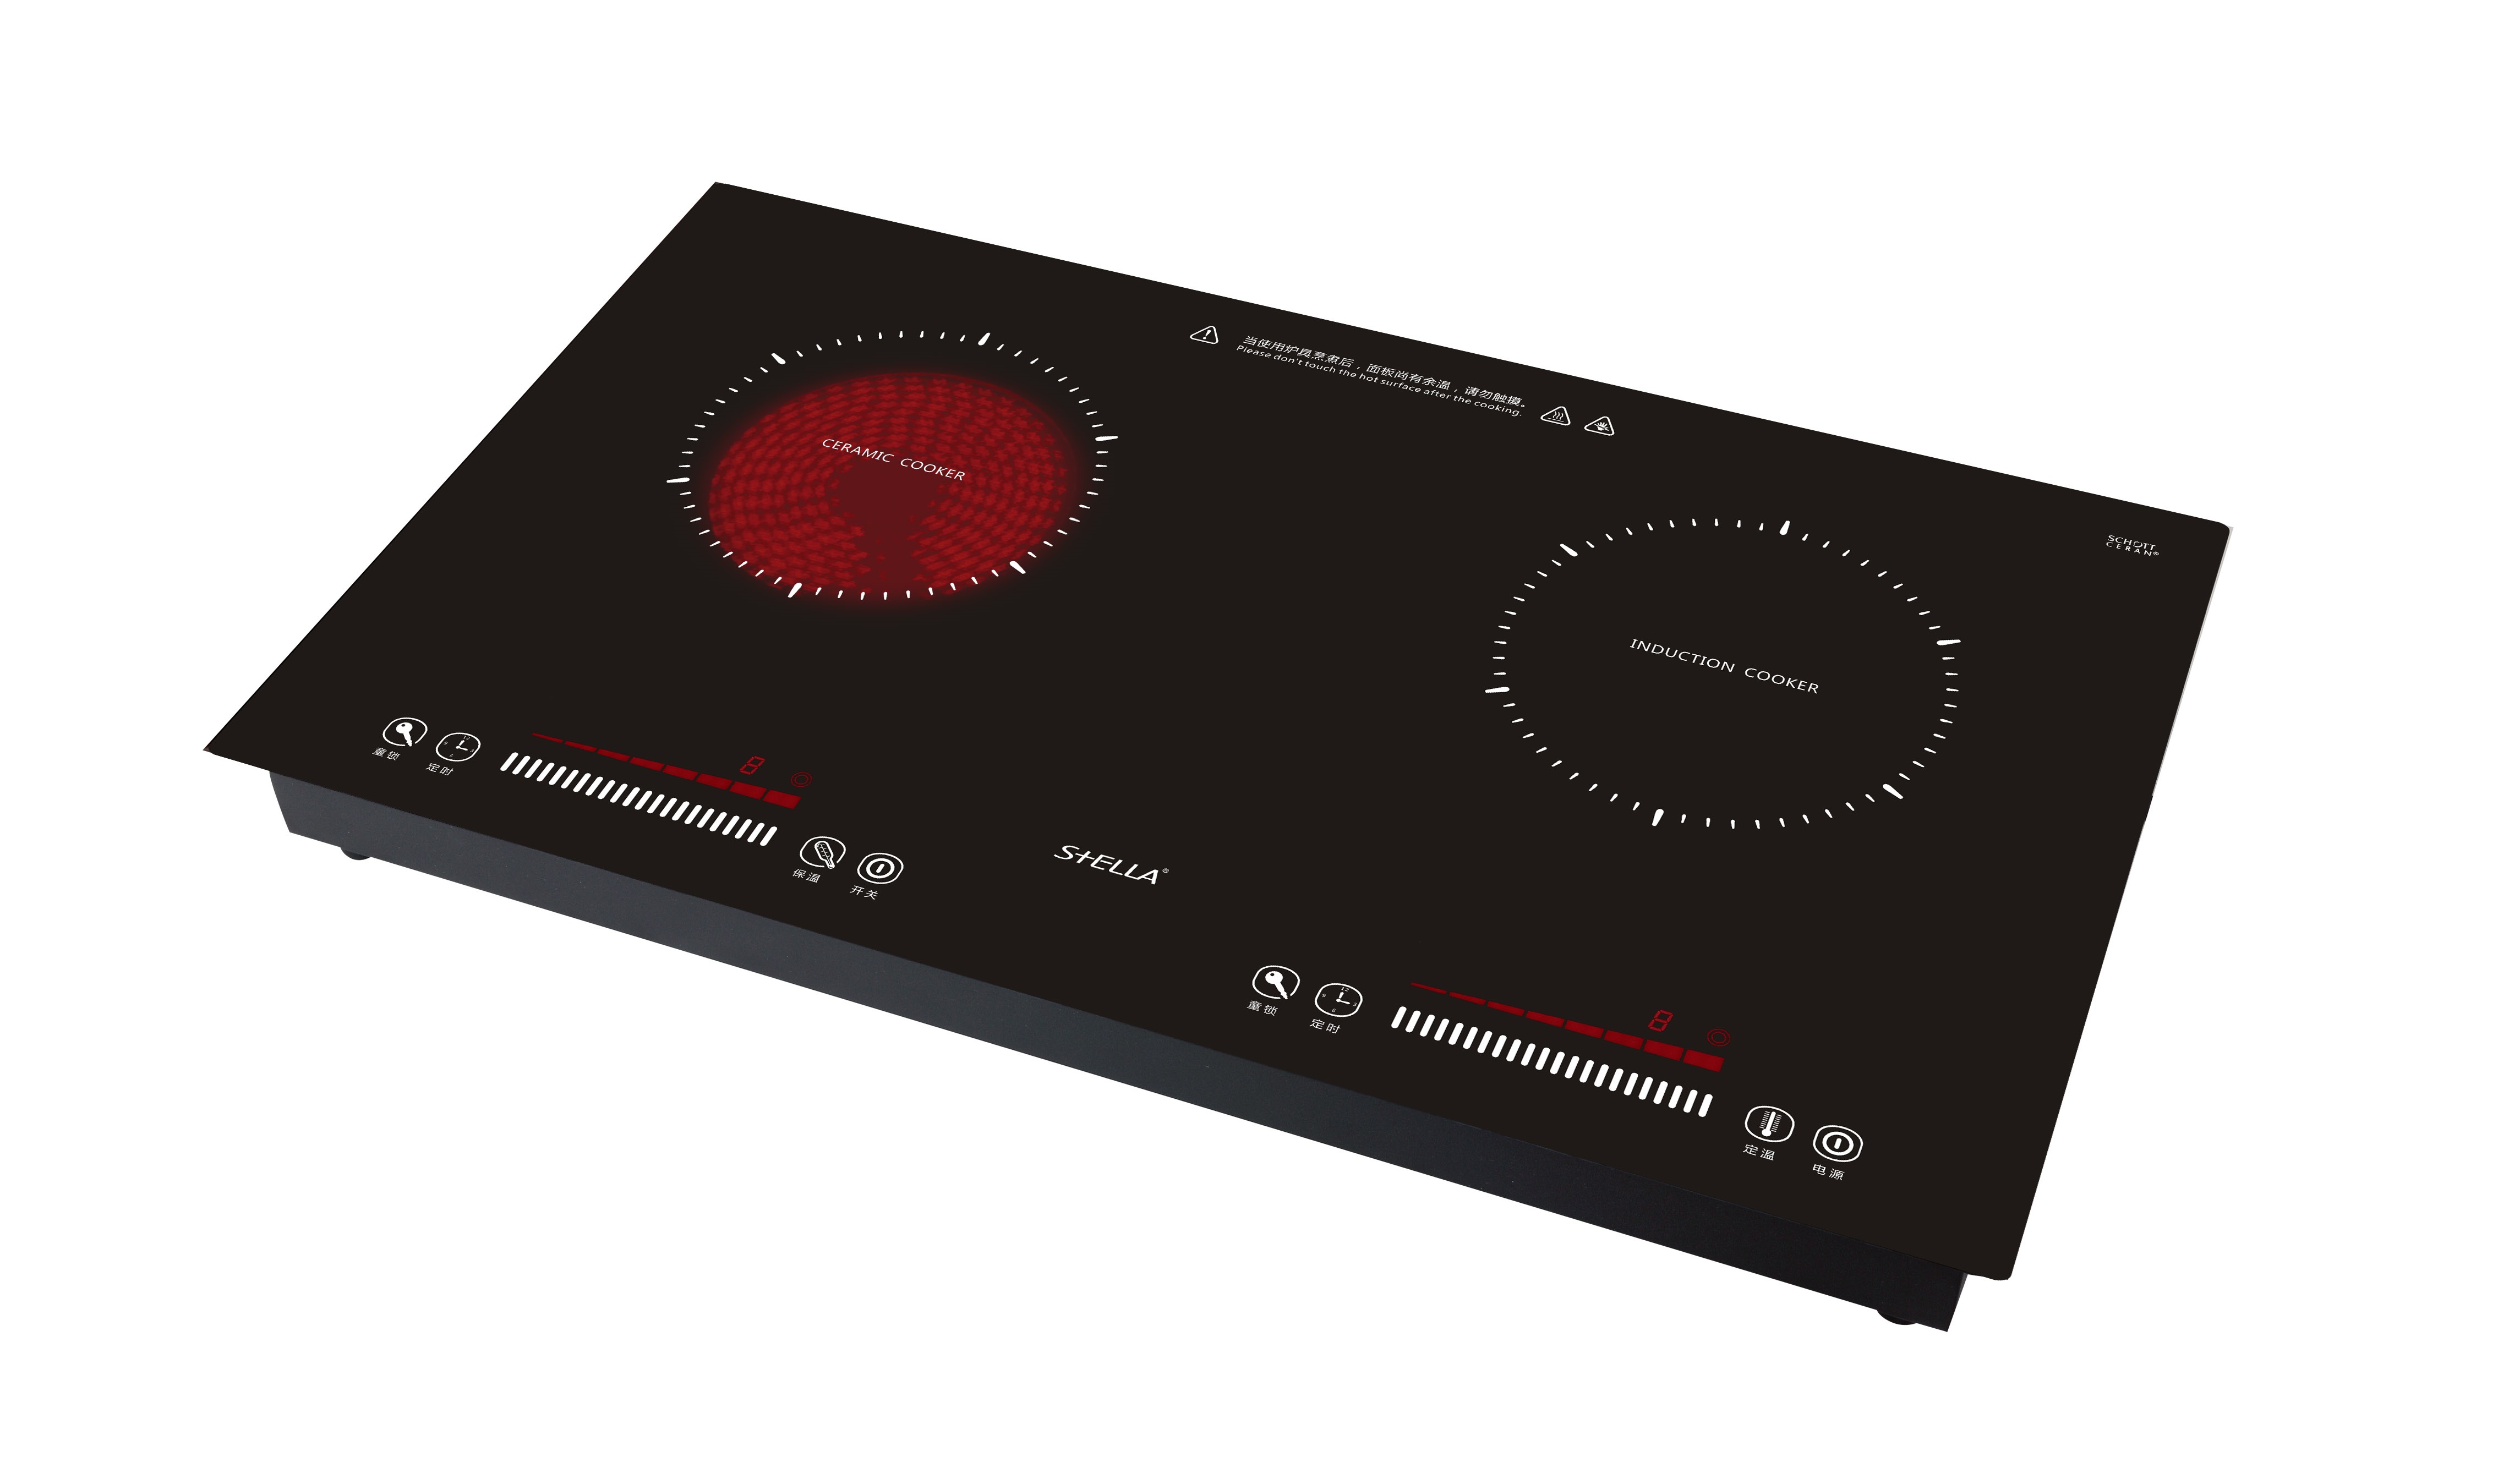 Microwave Cookware Induction Cooker Double Burners Hotpot 3100w,(Built In Adn Free-Standing Induction Cooker)Induction Cooker 3400w,(Built In And Free-Standing Induction Cooker)